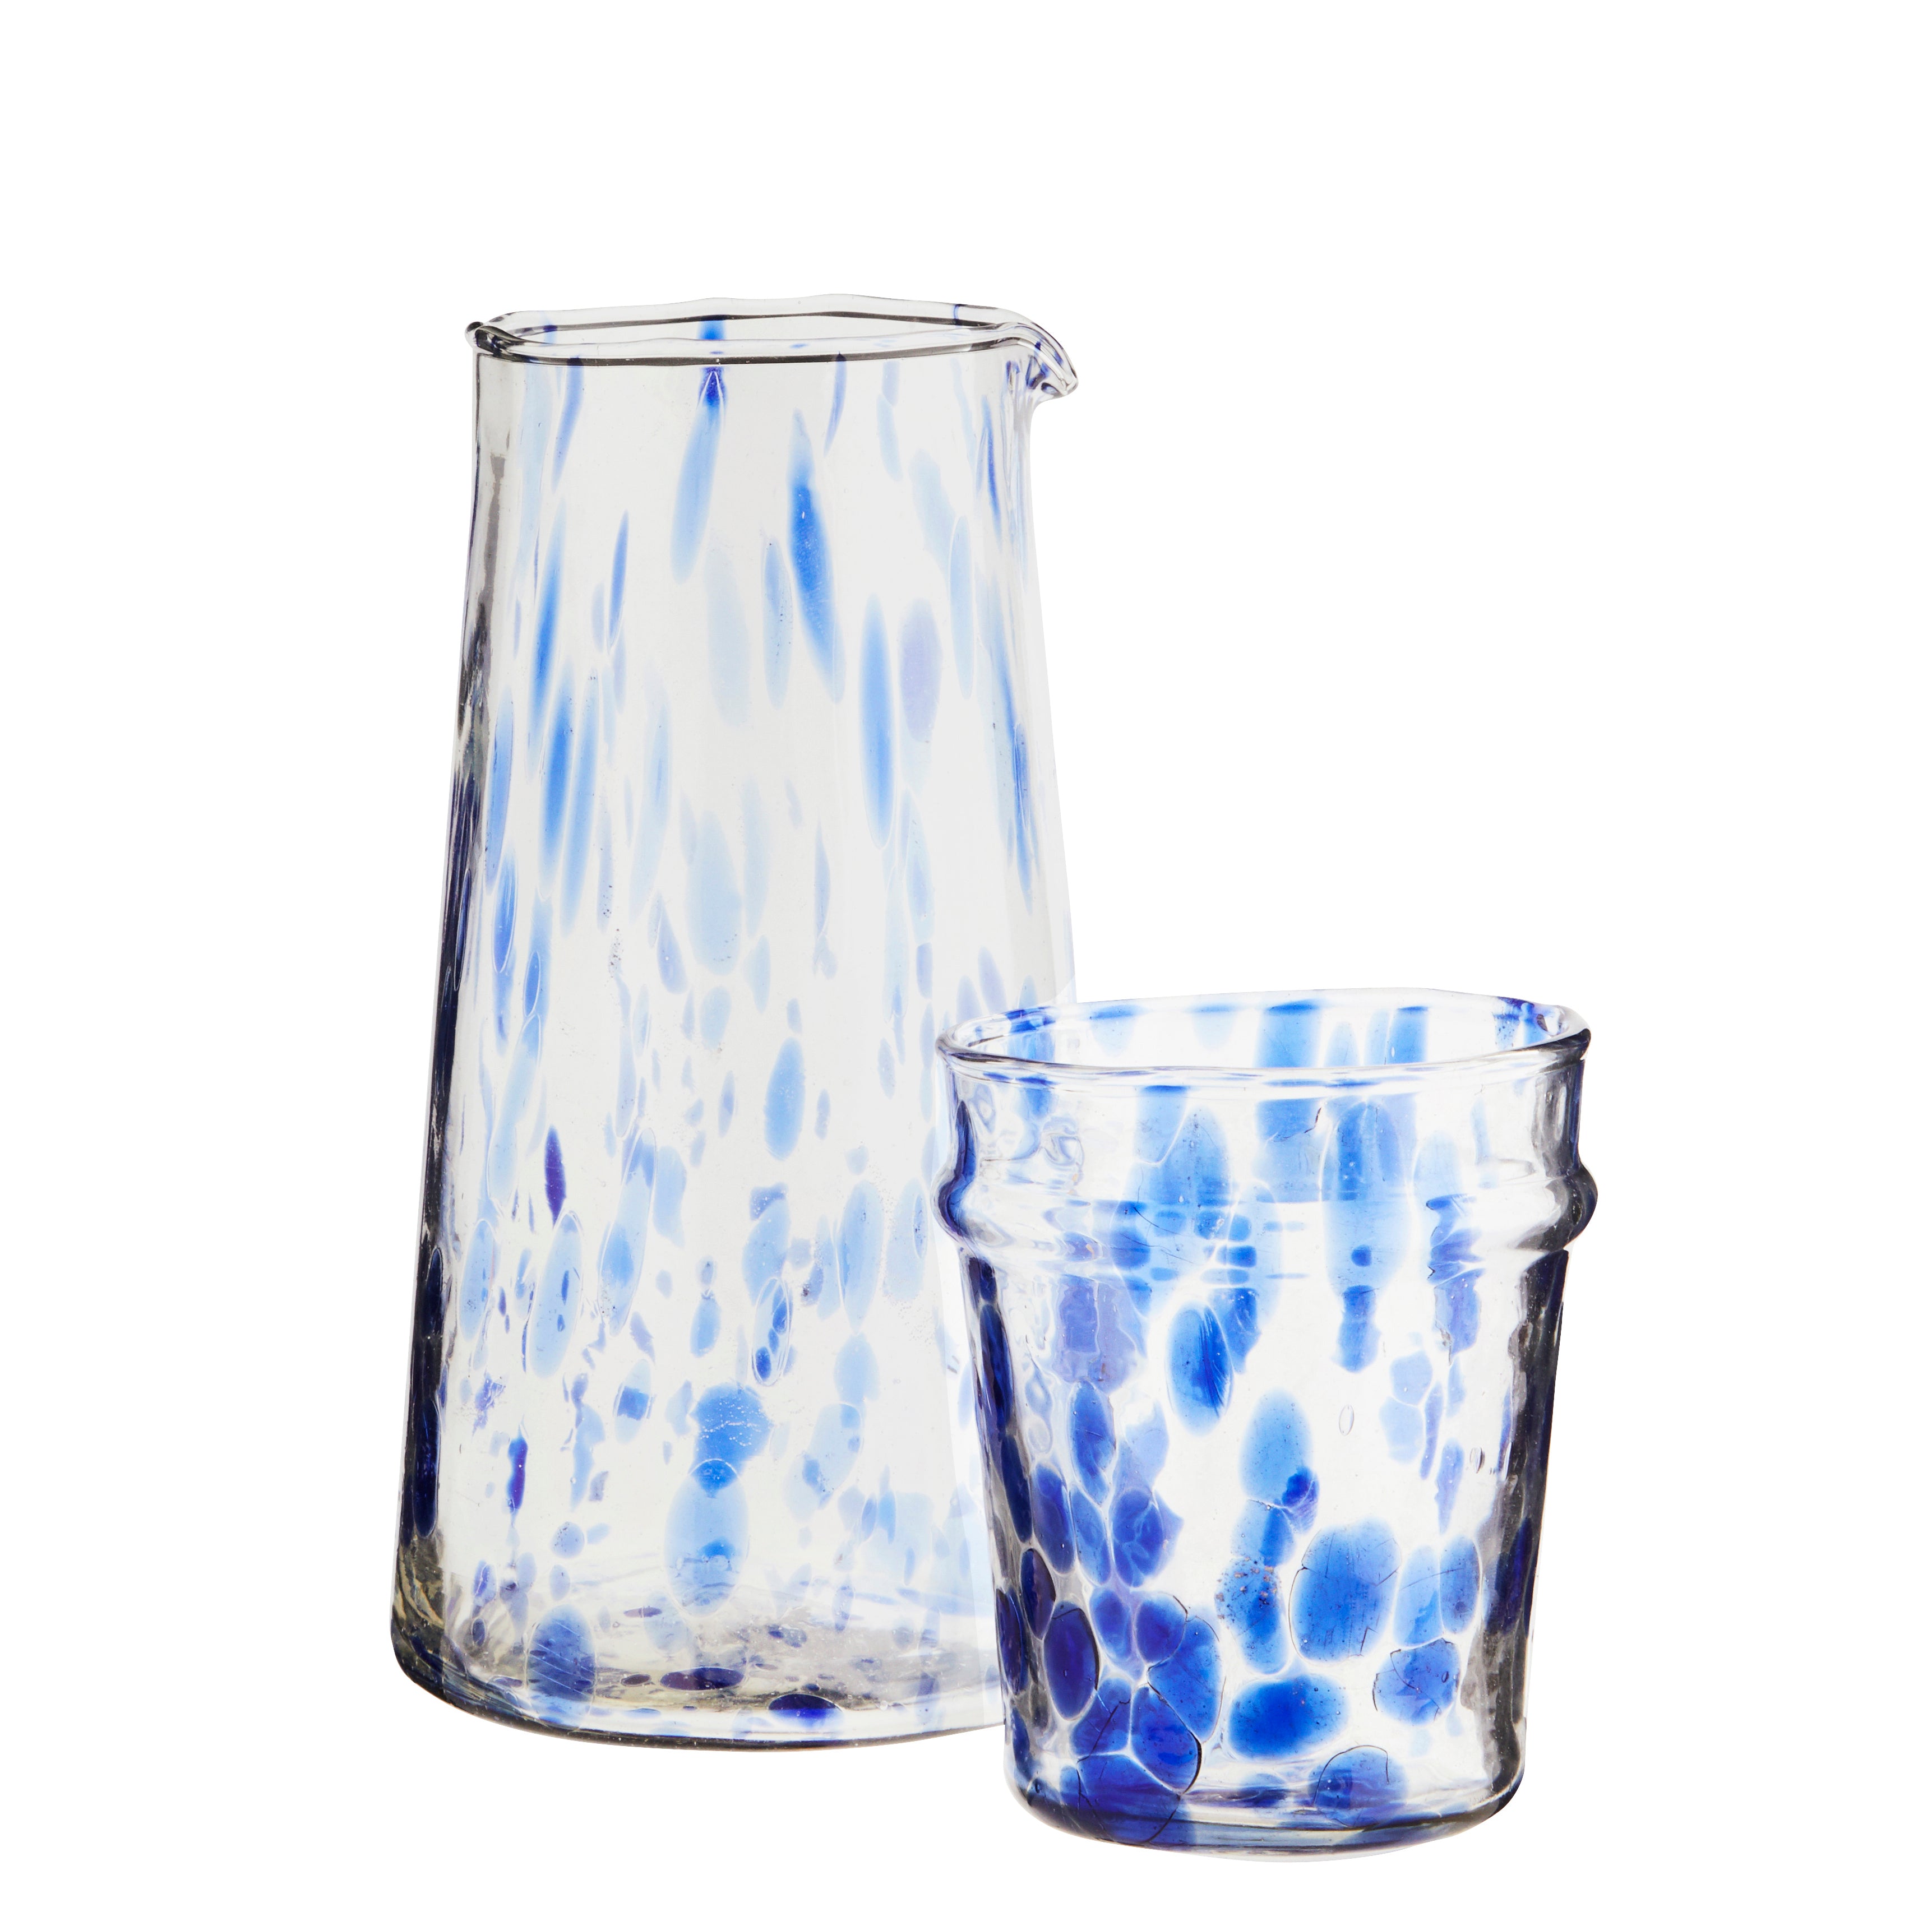 Speckled Drinking Glass | Blue